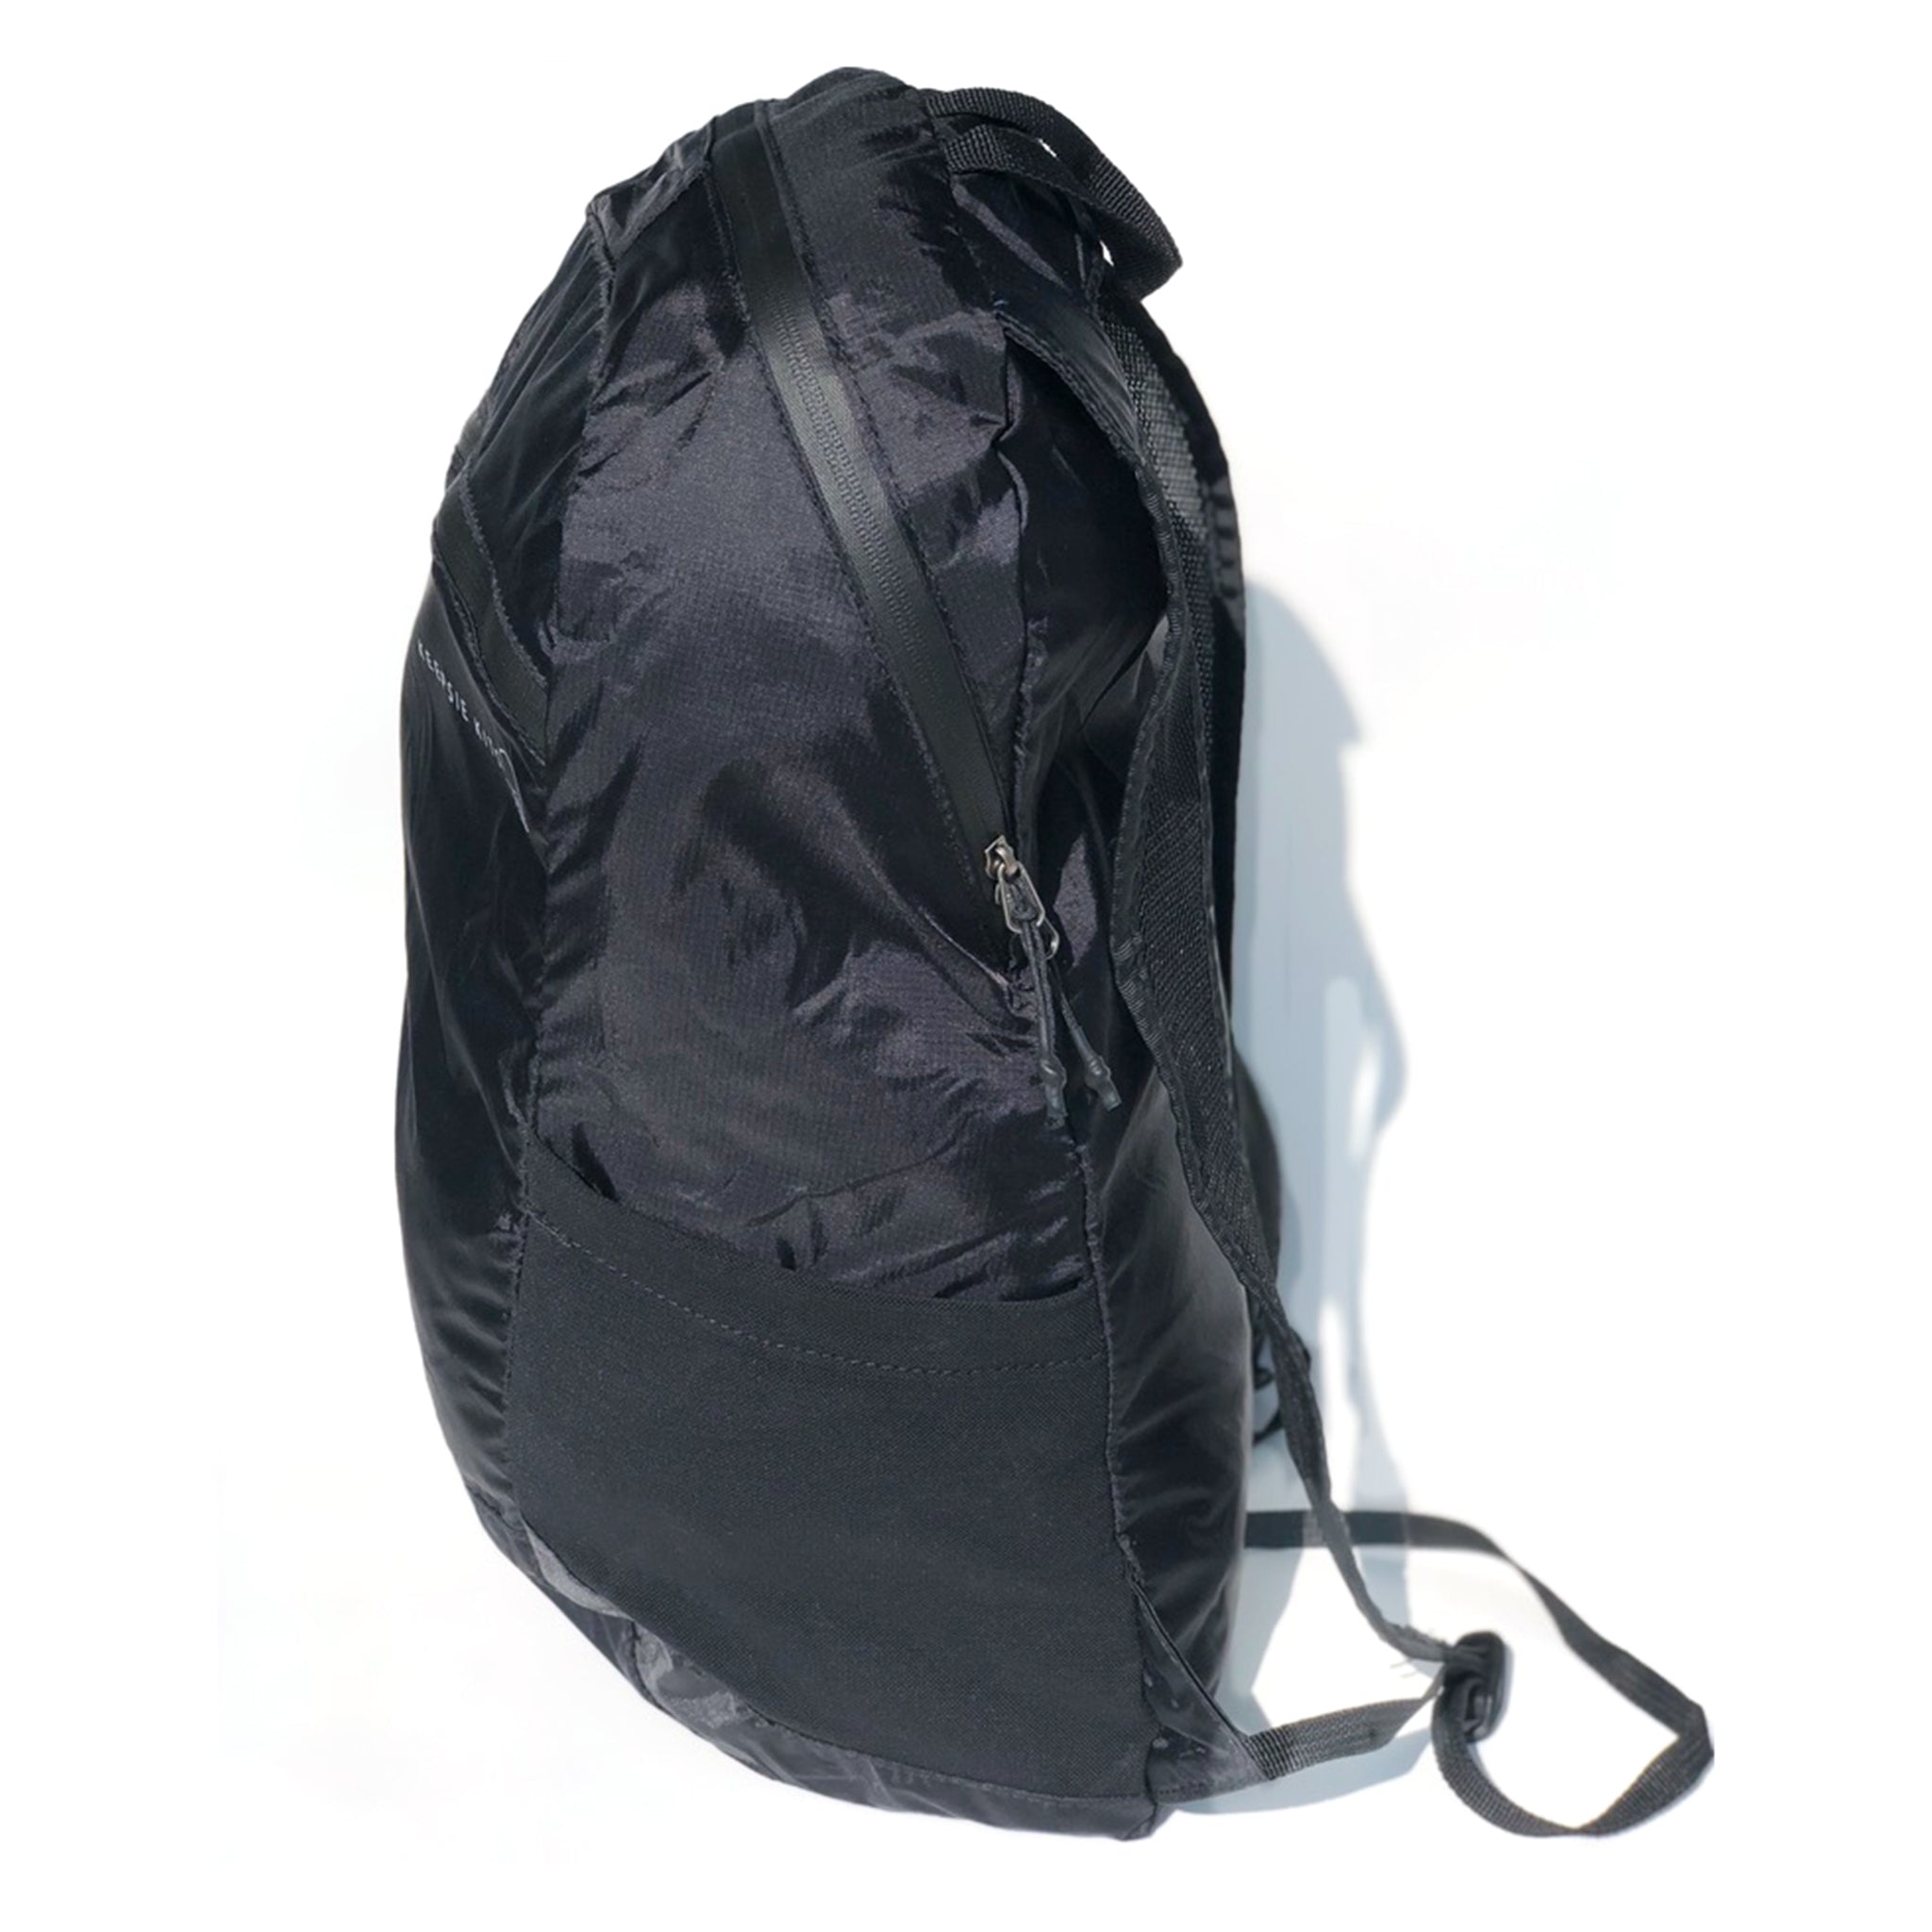 Explore20 Packable Backpack